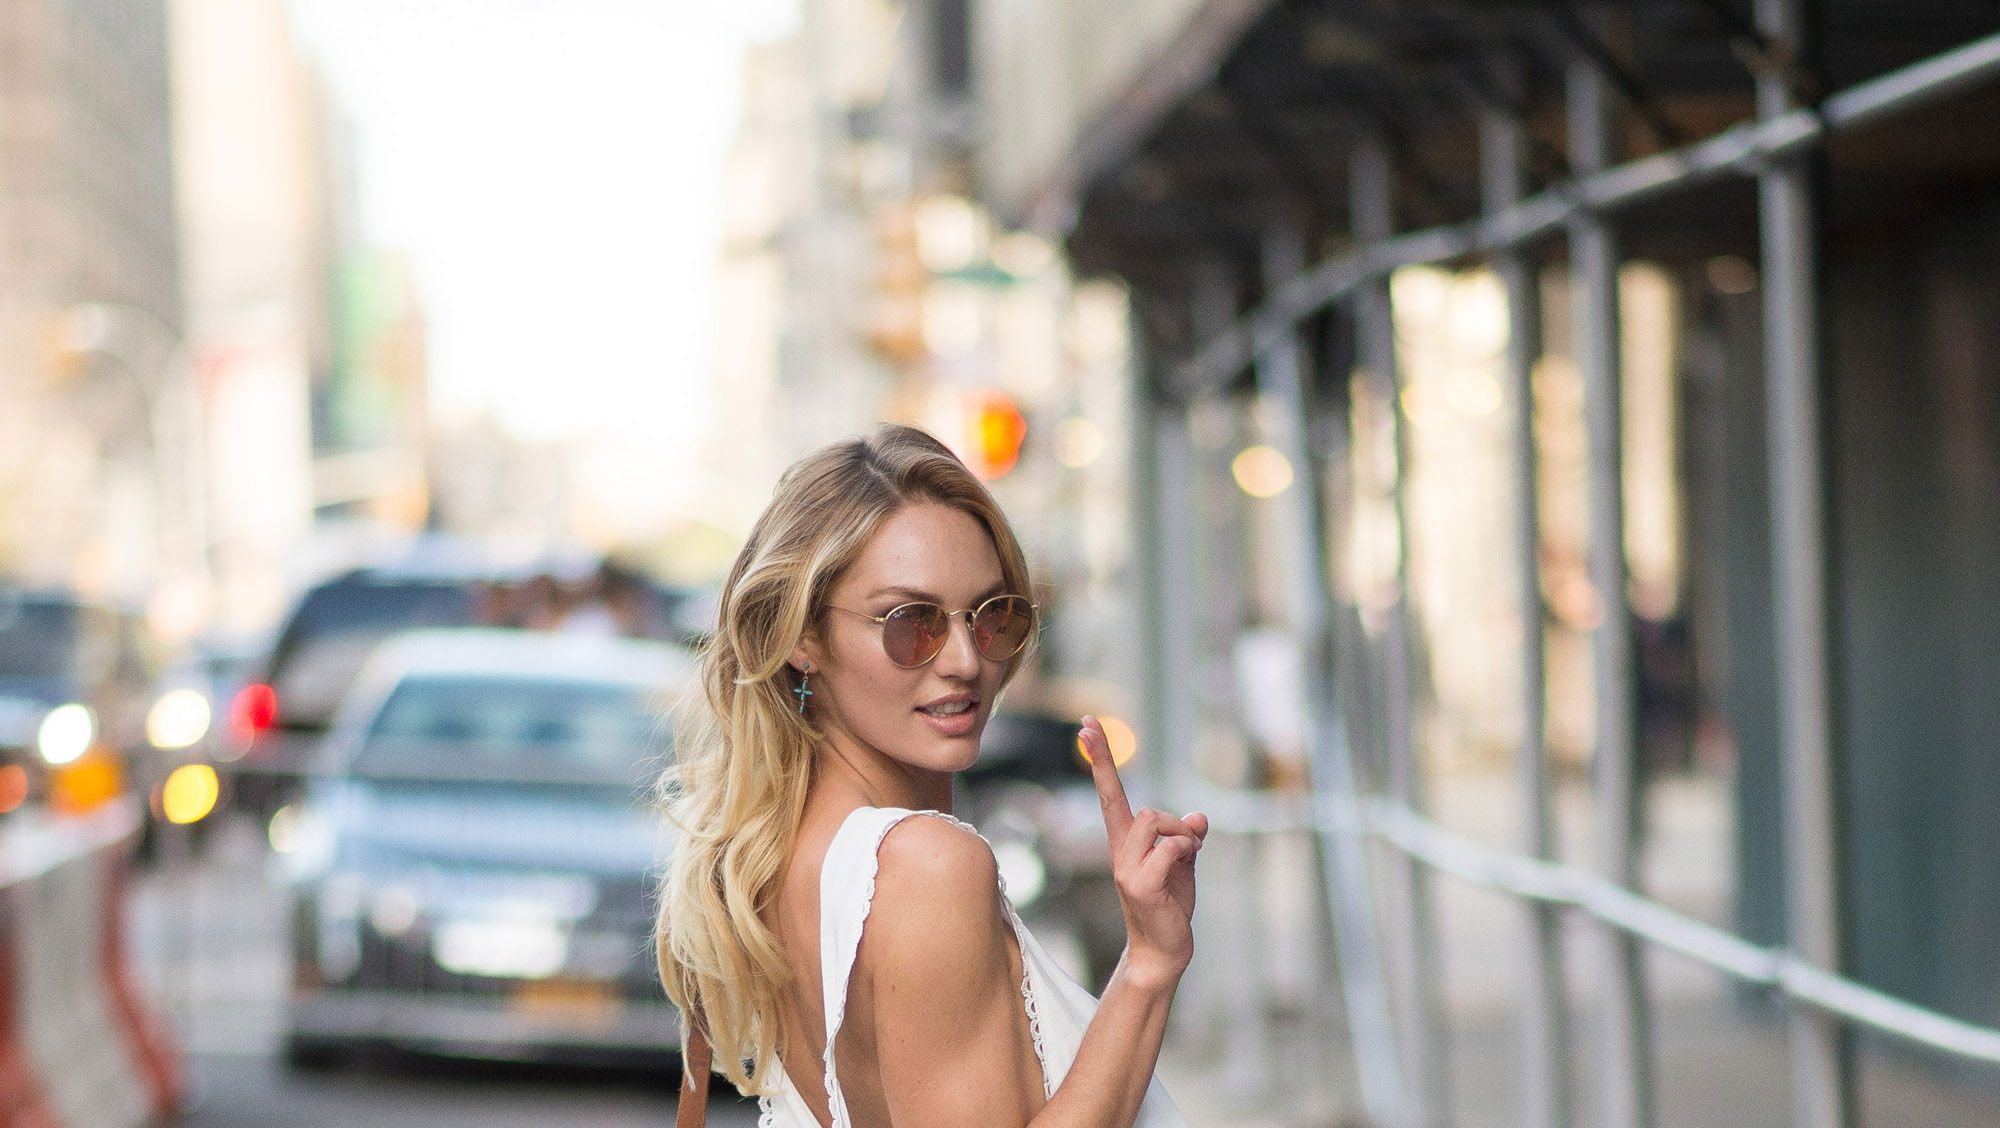 Candice Swanepoel Says Having Two Children Is 'Pretty Intense